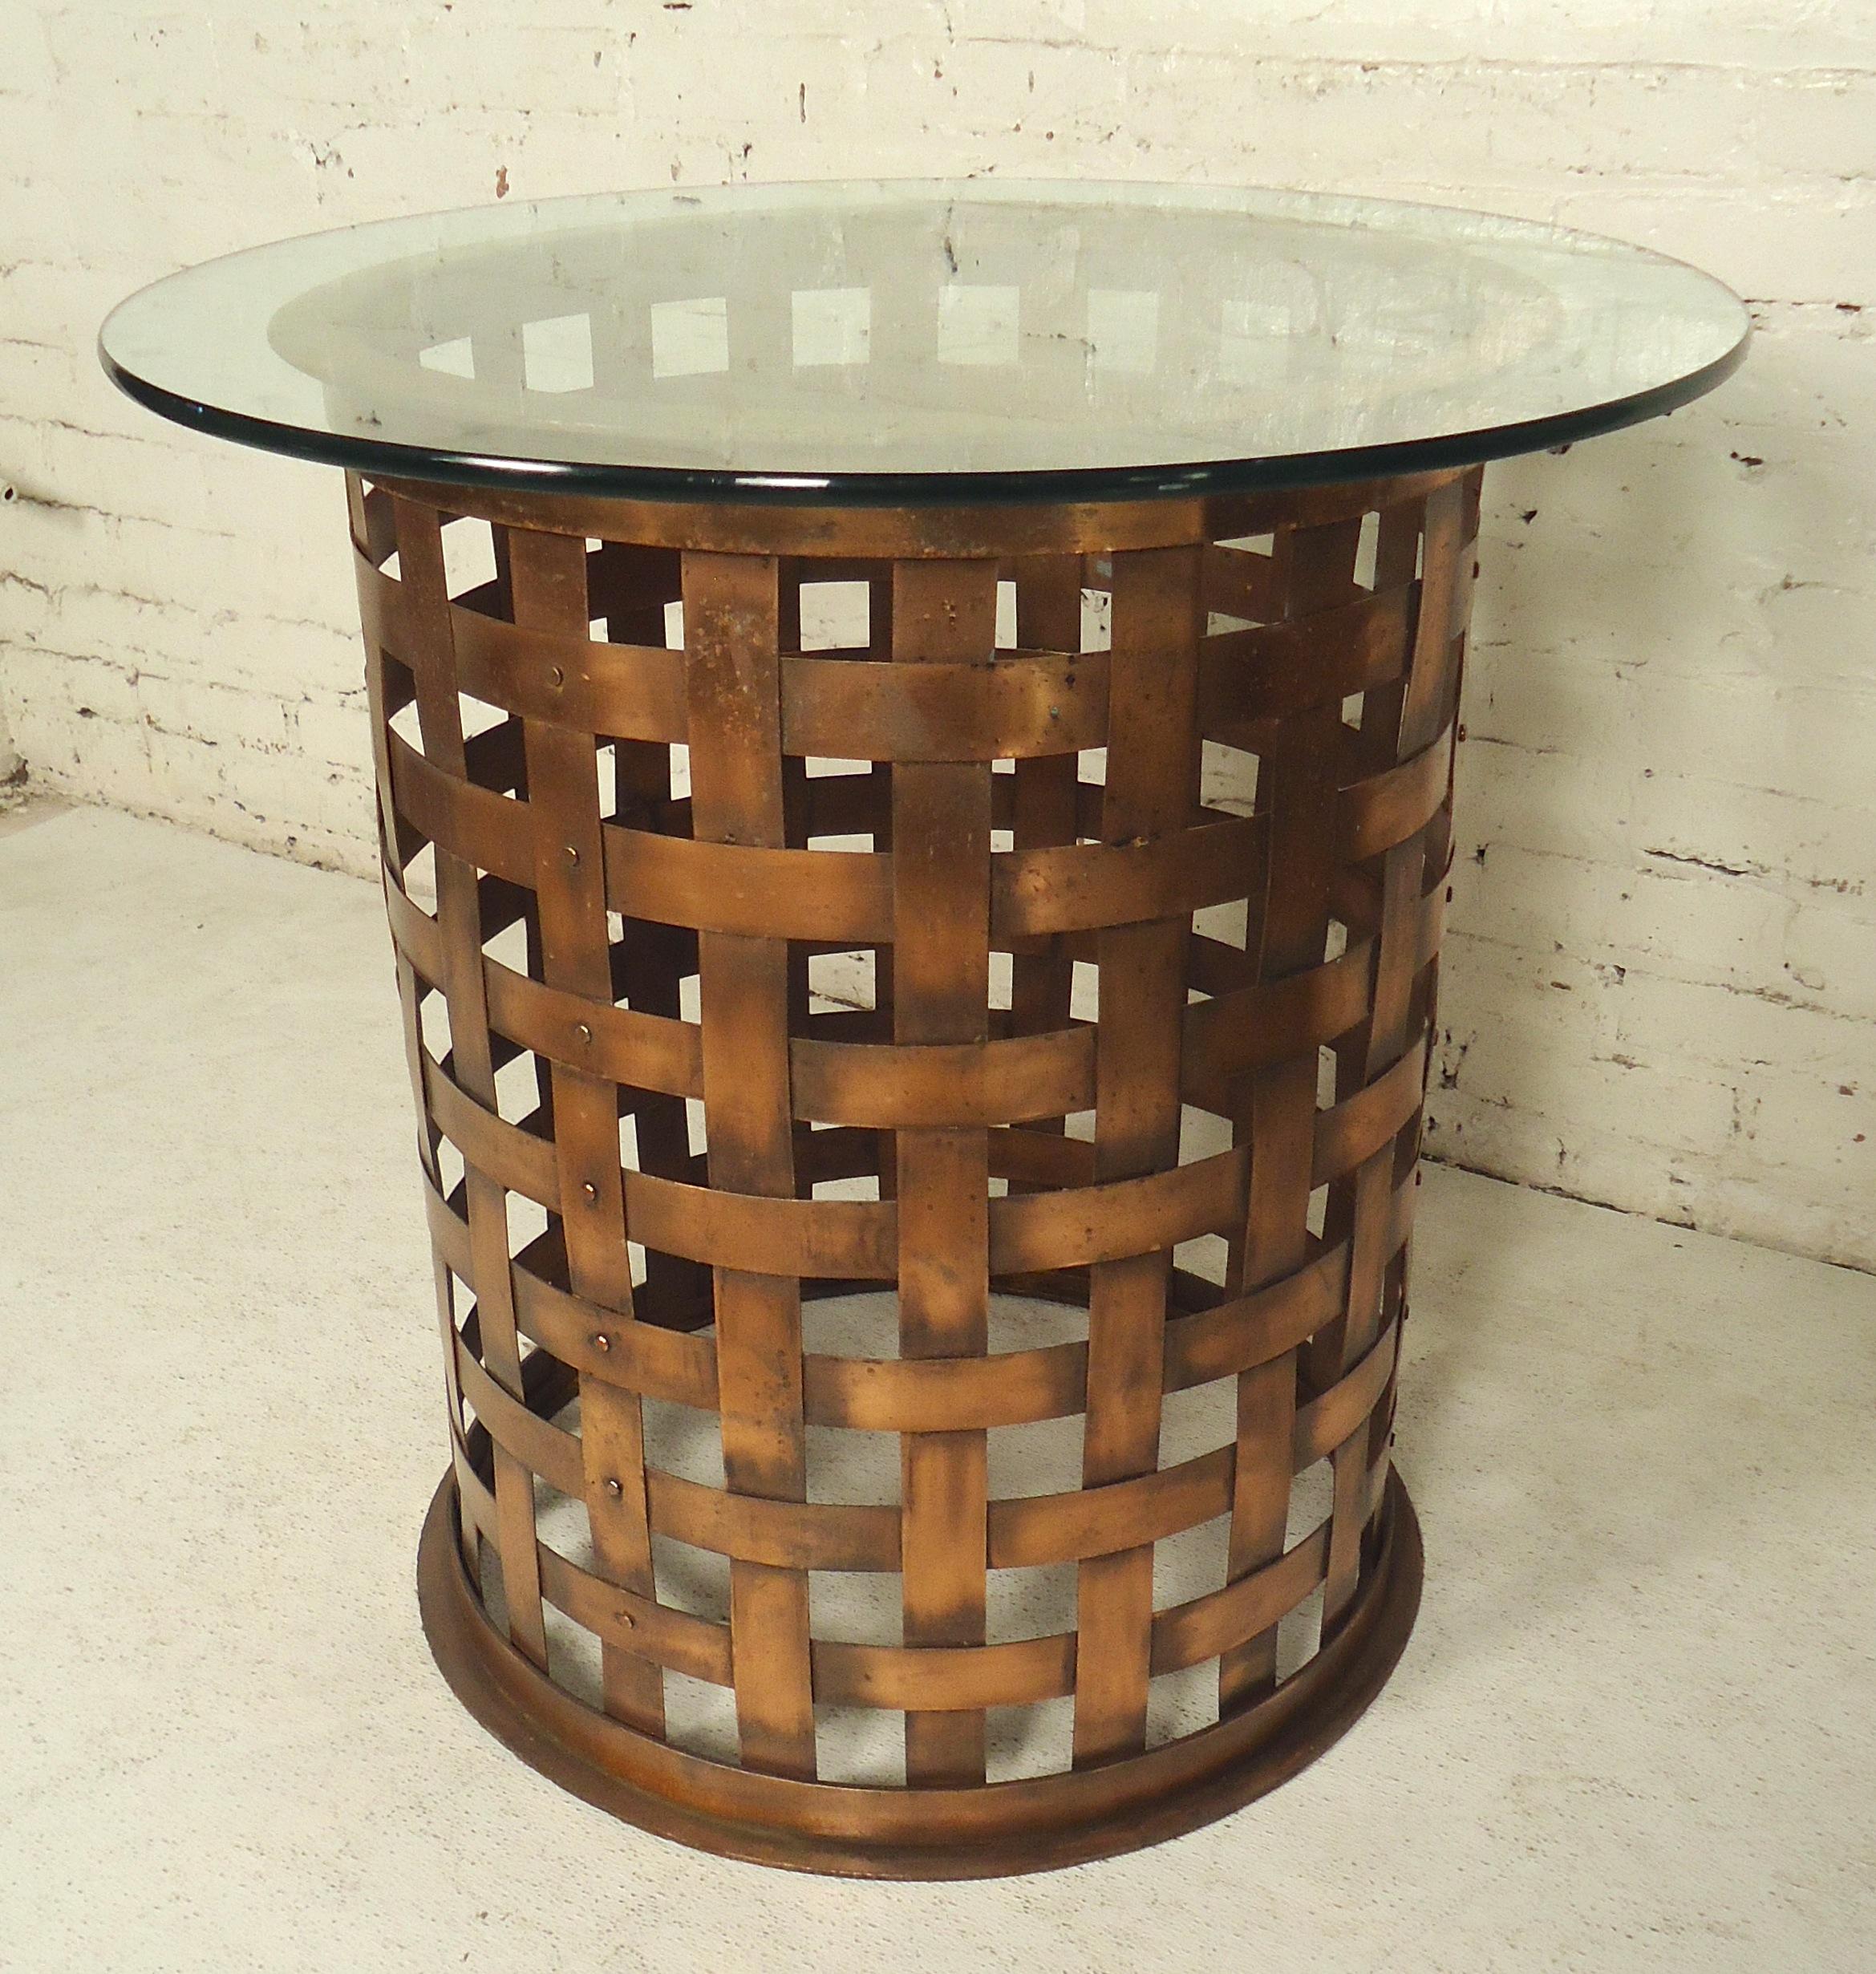 Lovely woven copper table with round glass top. Can be used as a pedestal table or dining table with larger glass.
Ask about larger glass top

(Please confirm item location - NY or NJ - with dealer).
 